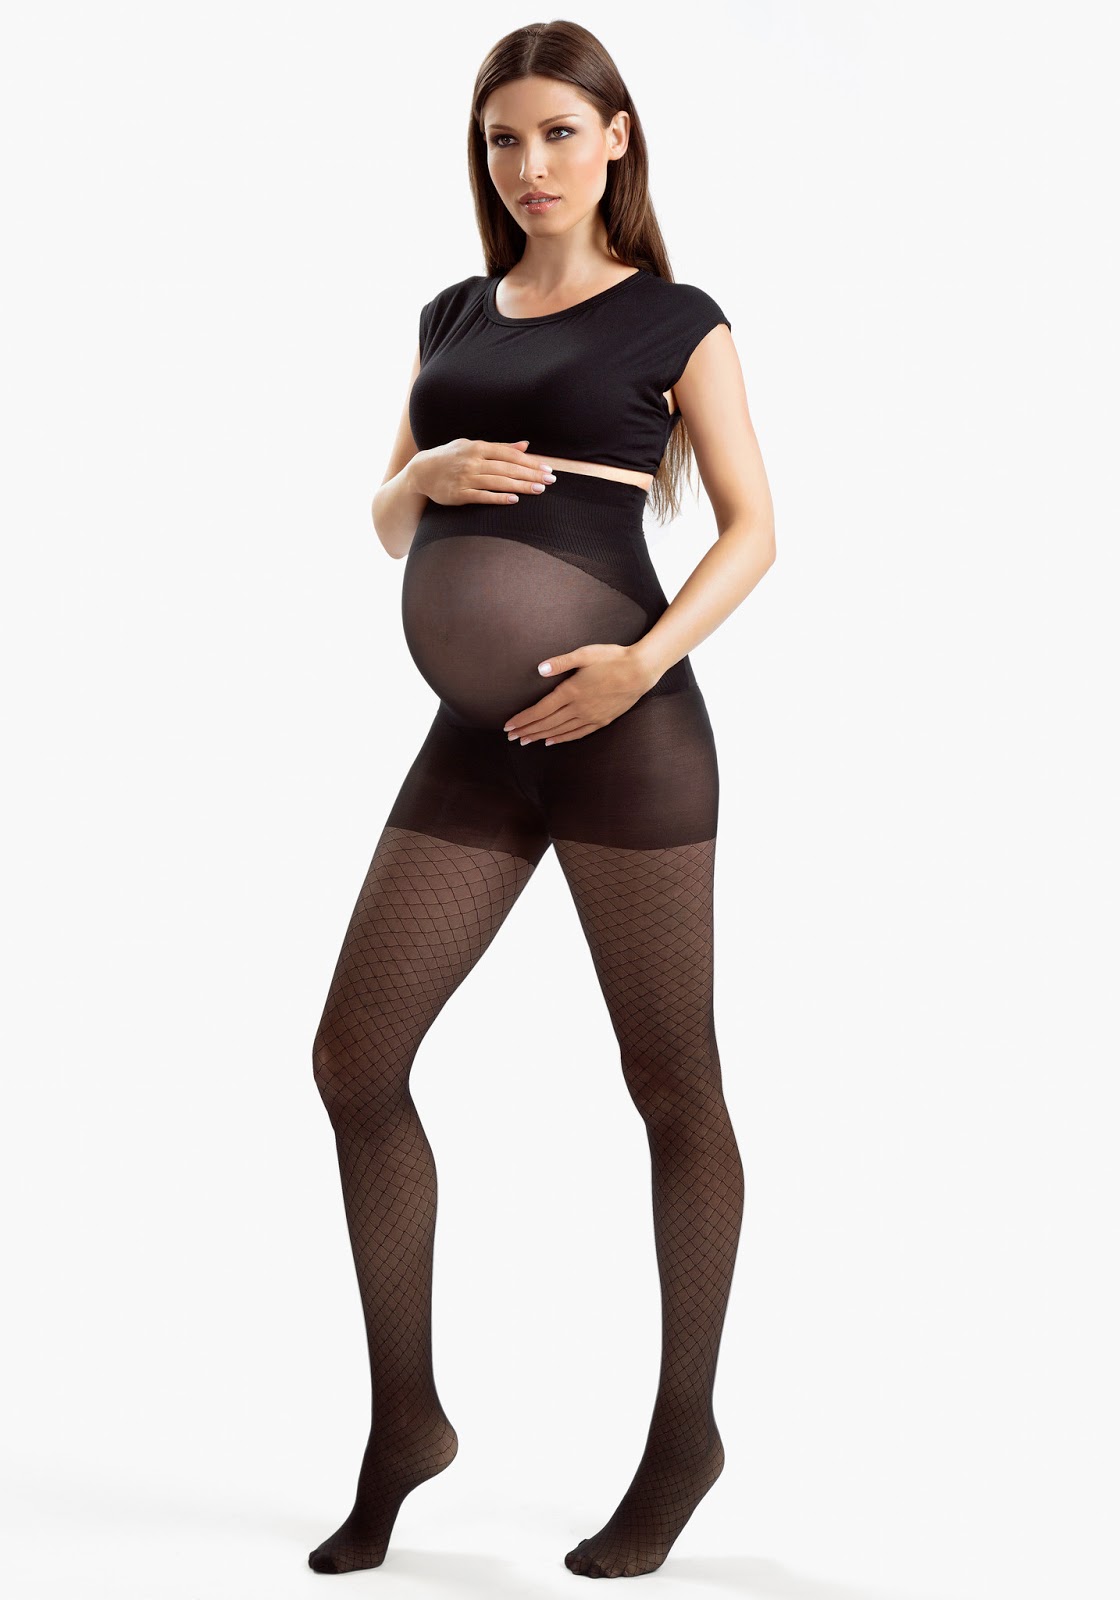 Fashion Tights Skirt Dress Heels Pantyhose Tights In Pregnancy